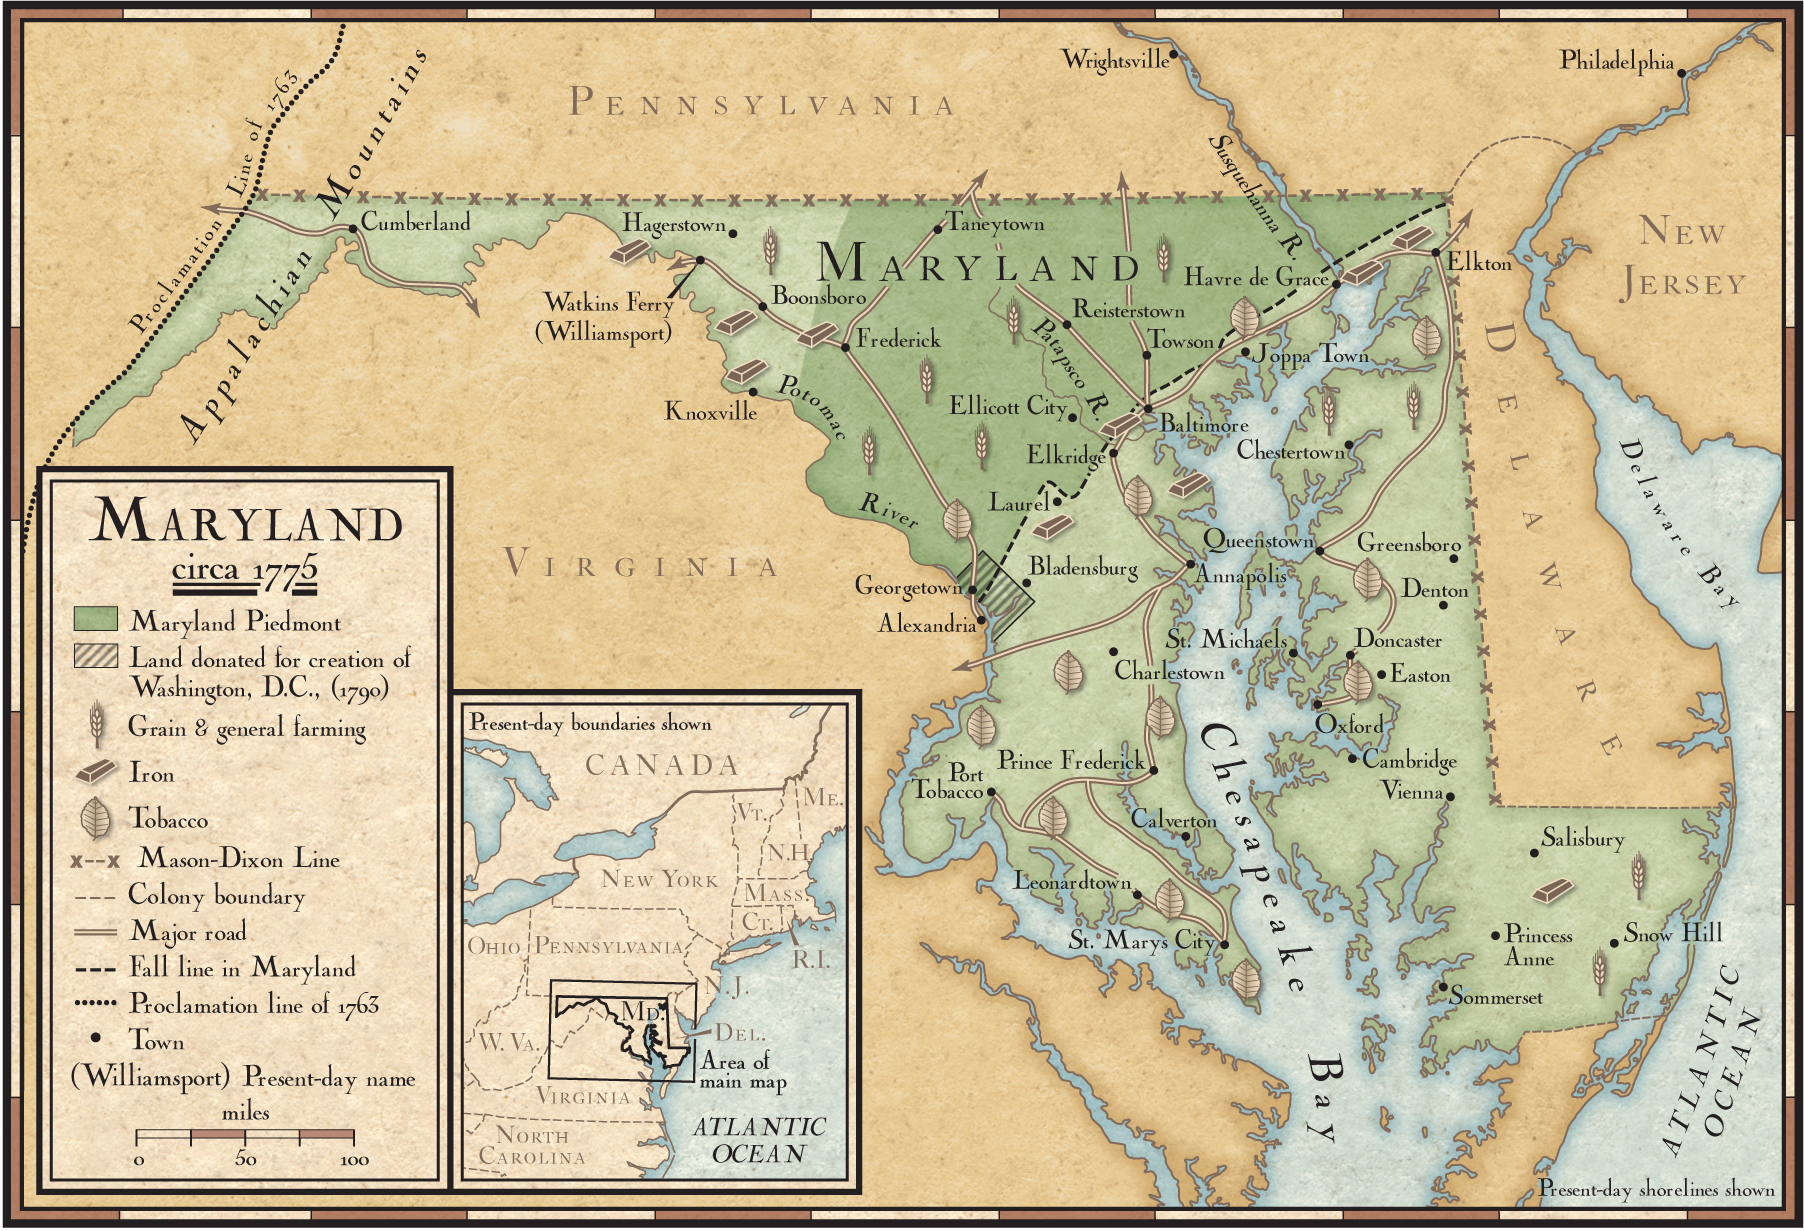 Farming and Mining in Maryland in 1775